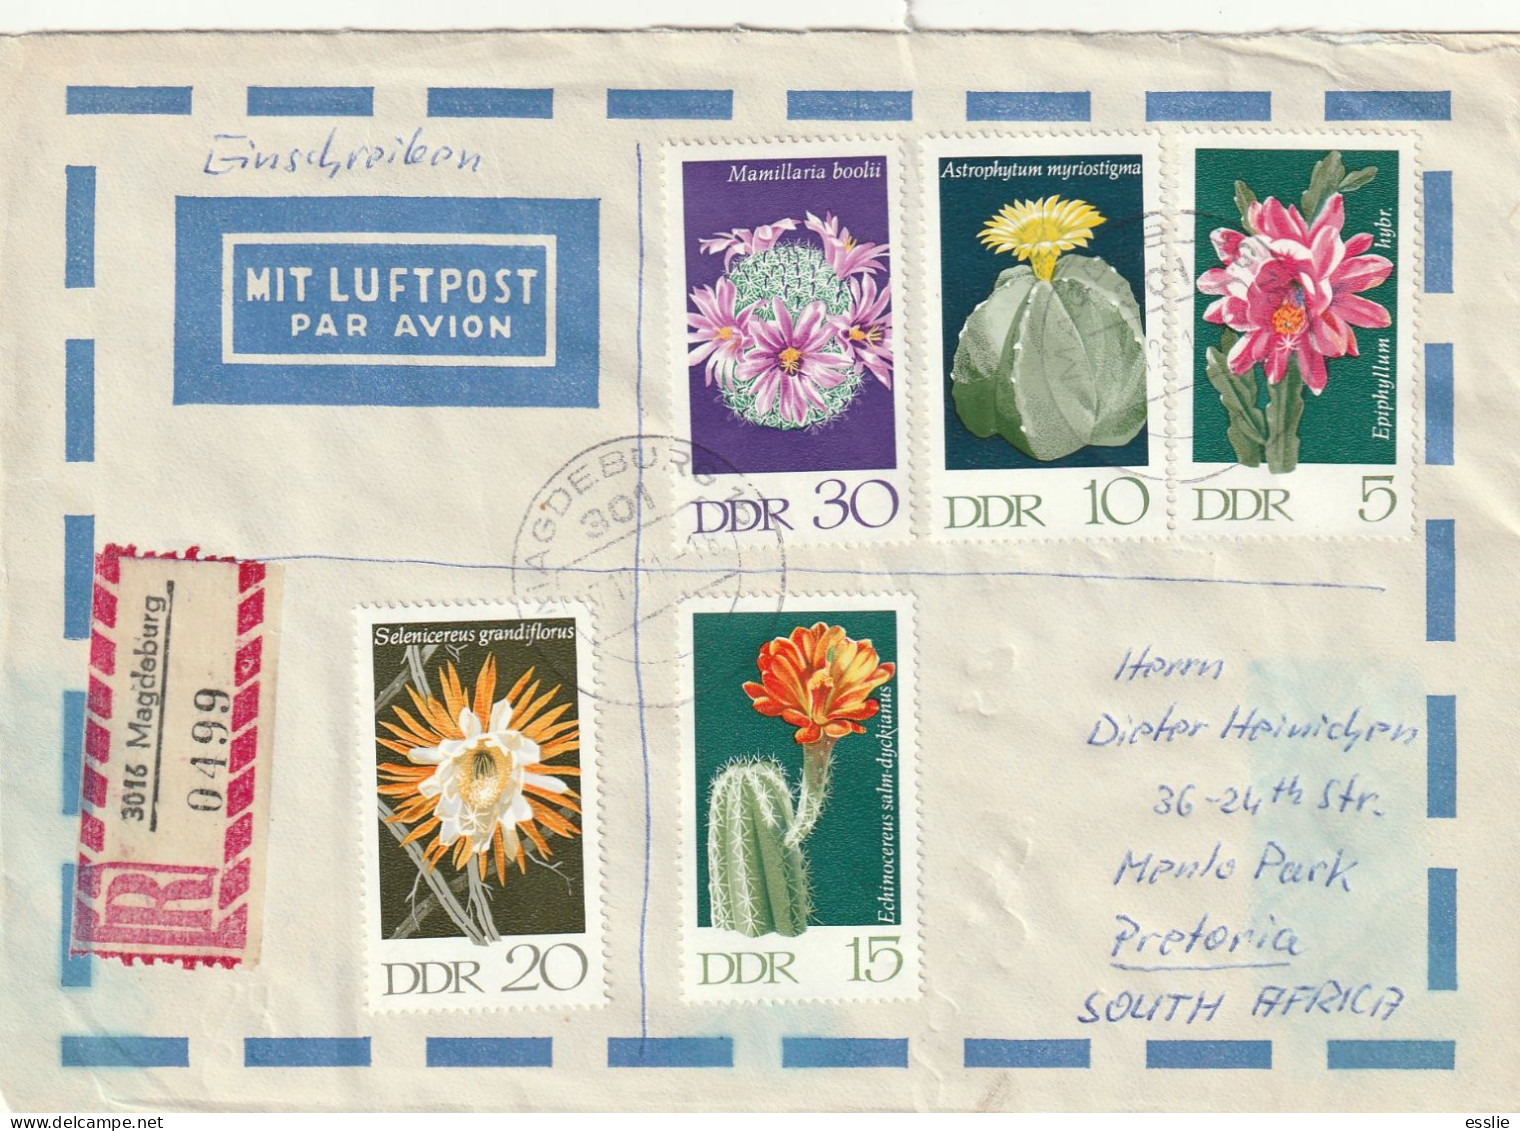 Germany DDR Cover Einschreiben Registered - 1970 - Flowering Cactus Plants Flowers Flora Fairy Tale Little Brother - Covers & Documents